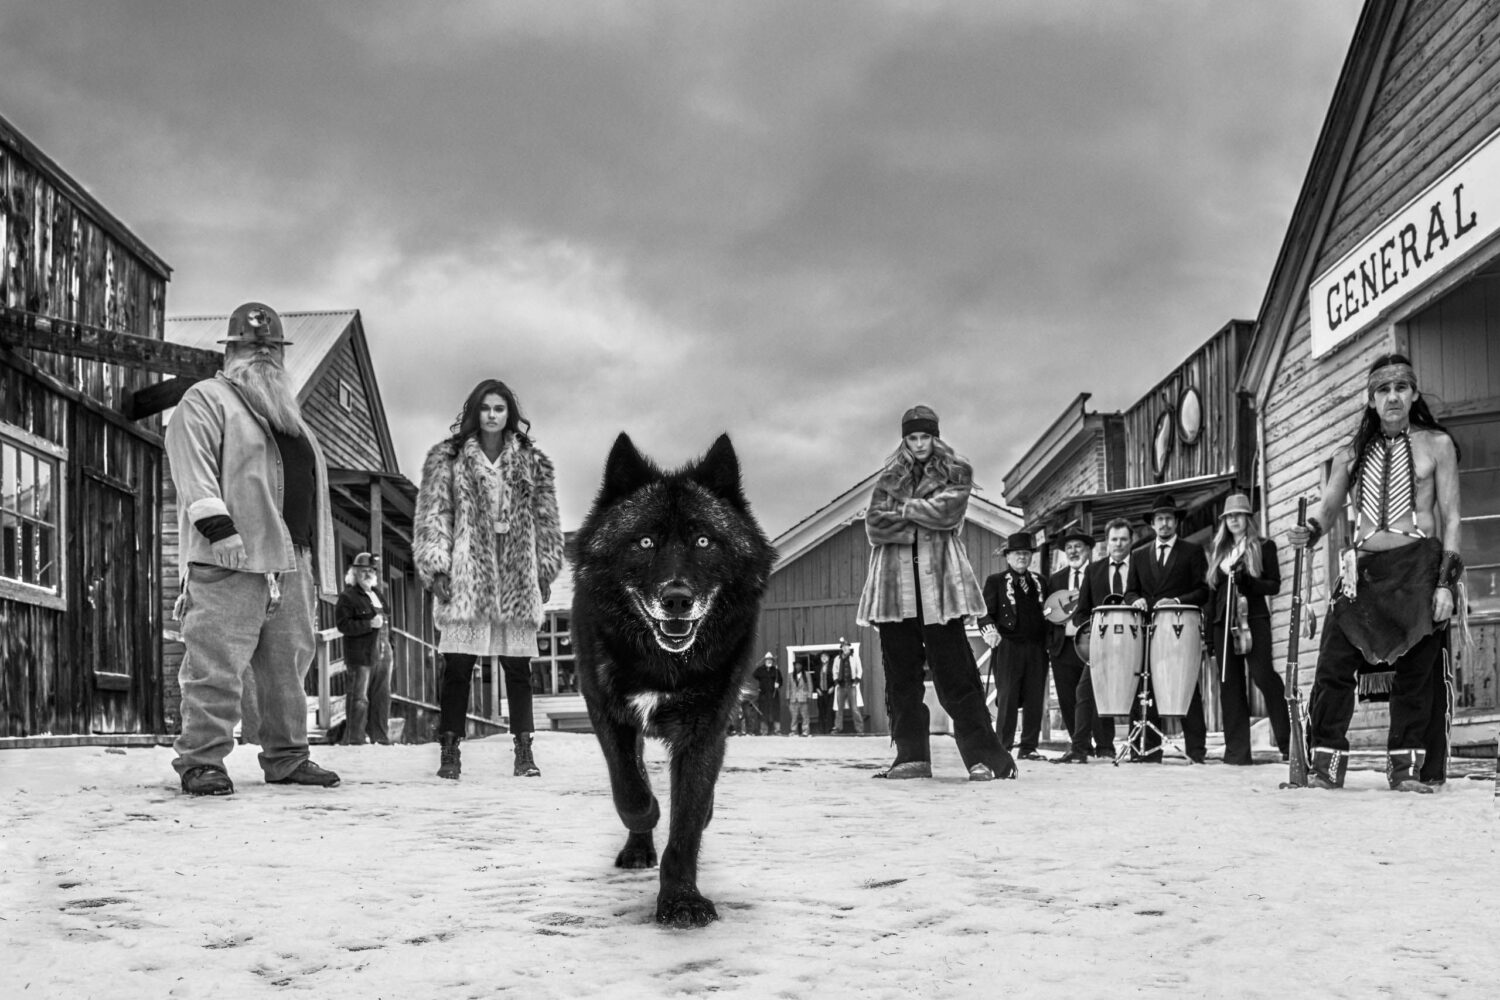 David Yarrow: There Will Be Blood